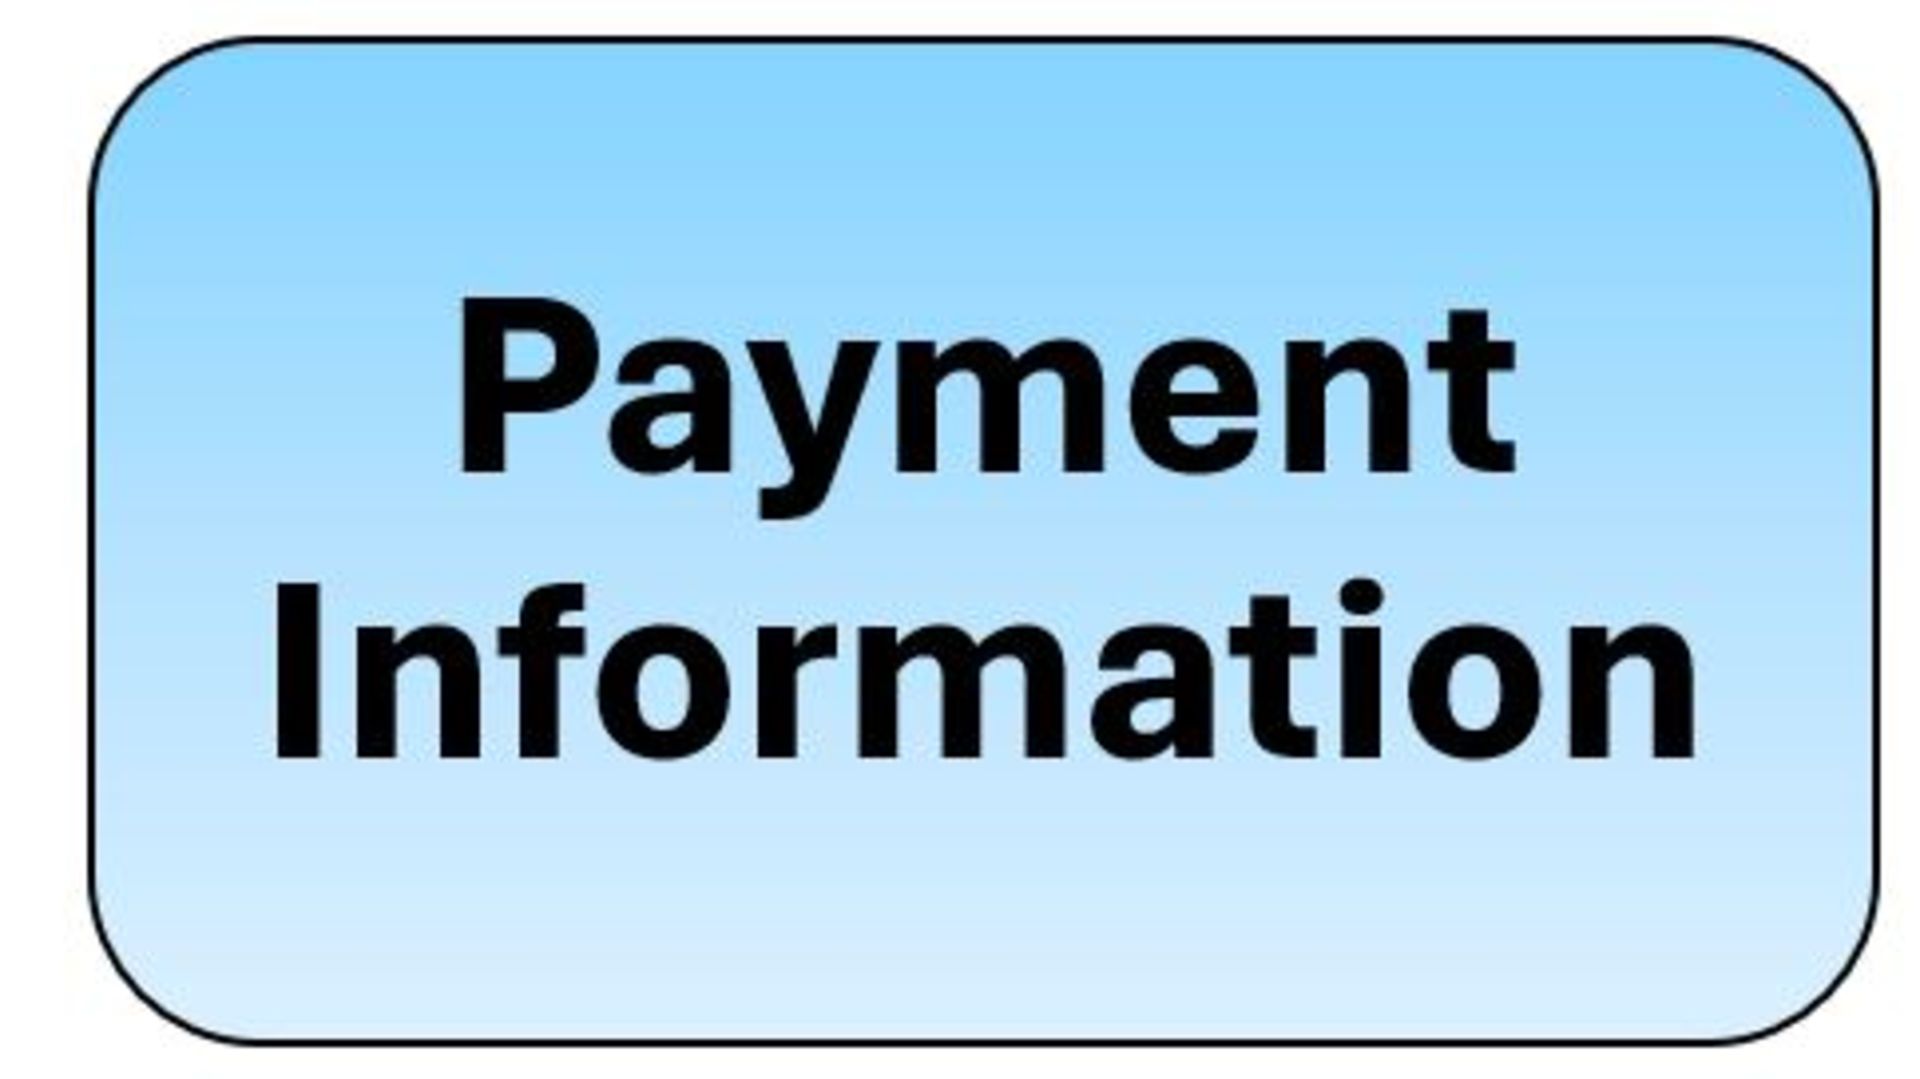 PAYMENT INFORMATION: